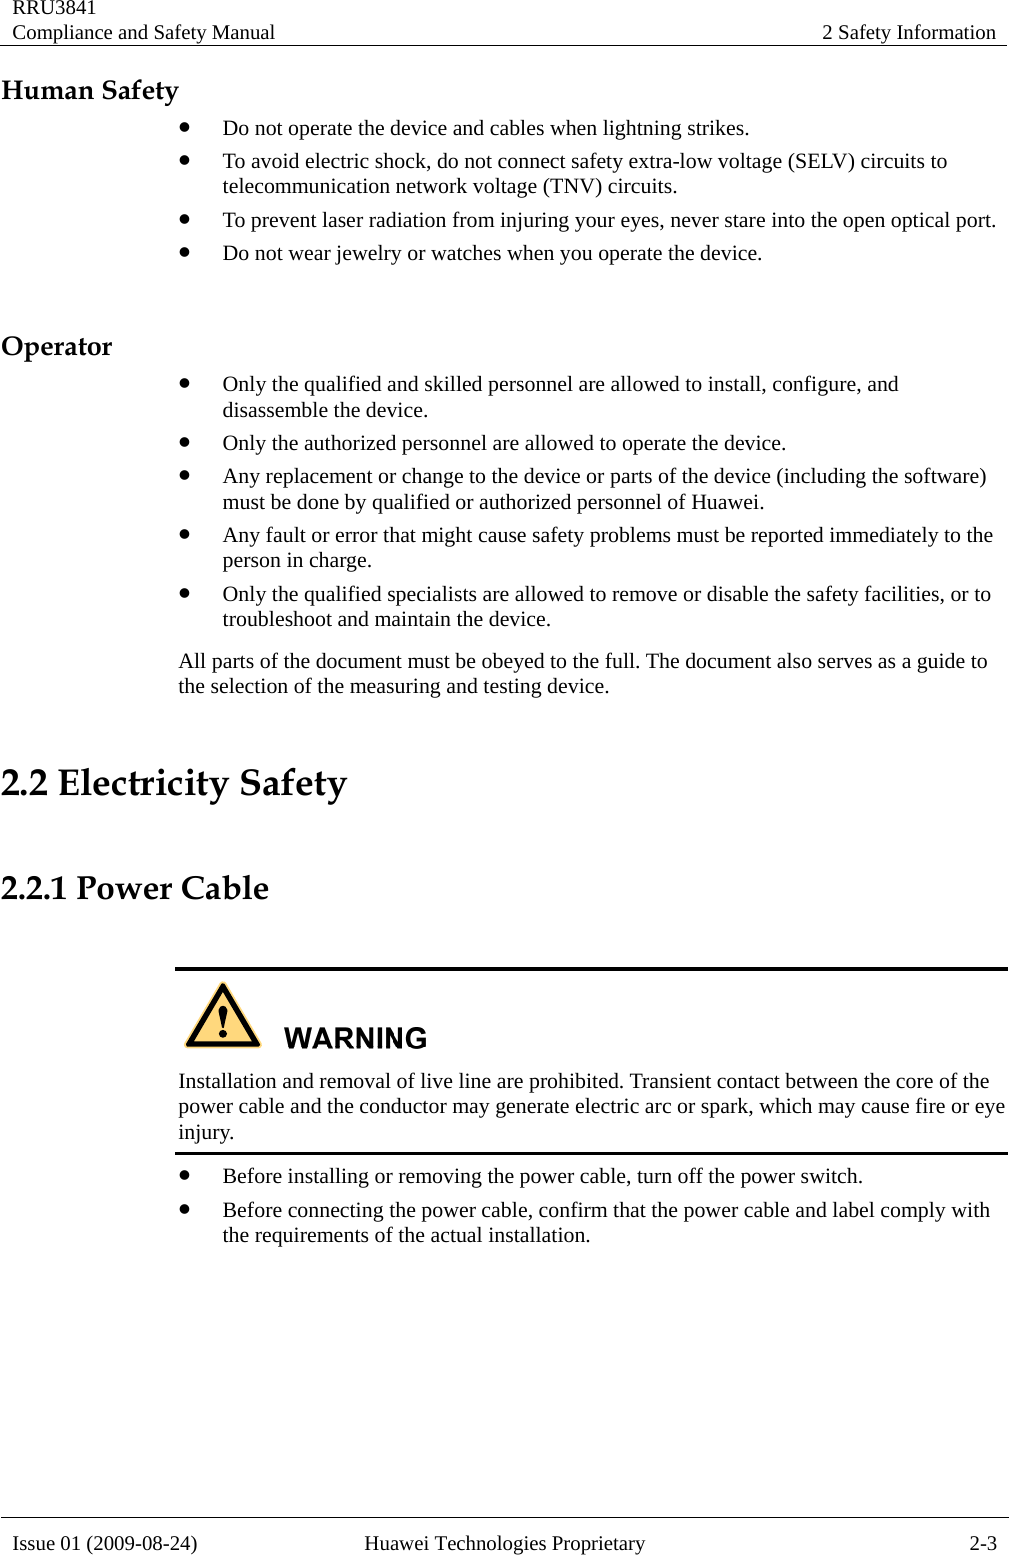 RRU3841 Compliance and Safety Manual  2 Safety Information  Issue 01 (2009-08-24)  Huawei Technologies Proprietary  2-3 Human Safety z Do not operate the device and cables when lightning strikes.   z To avoid electric shock, do not connect safety extra-low voltage (SELV) circuits to telecommunication network voltage (TNV) circuits. z To prevent laser radiation from injuring your eyes, never stare into the open optical port. z Do not wear jewelry or watches when you operate the device.  Operator z Only the qualified and skilled personnel are allowed to install, configure, and disassemble the device. z Only the authorized personnel are allowed to operate the device. z Any replacement or change to the device or parts of the device (including the software) must be done by qualified or authorized personnel of Huawei. z Any fault or error that might cause safety problems must be reported immediately to the person in charge. z Only the qualified specialists are allowed to remove or disable the safety facilities, or to troubleshoot and maintain the device. All parts of the document must be obeyed to the full. The document also serves as a guide to the selection of the measuring and testing device. 2.2 Electricity Safety  2.2.1 Power Cable   Installation and removal of live line are prohibited. Transient contact between the core of the power cable and the conductor may generate electric arc or spark, which may cause fire or eye injury. z Before installing or removing the power cable, turn off the power switch. z Before connecting the power cable, confirm that the power cable and label comply with the requirements of the actual installation.  